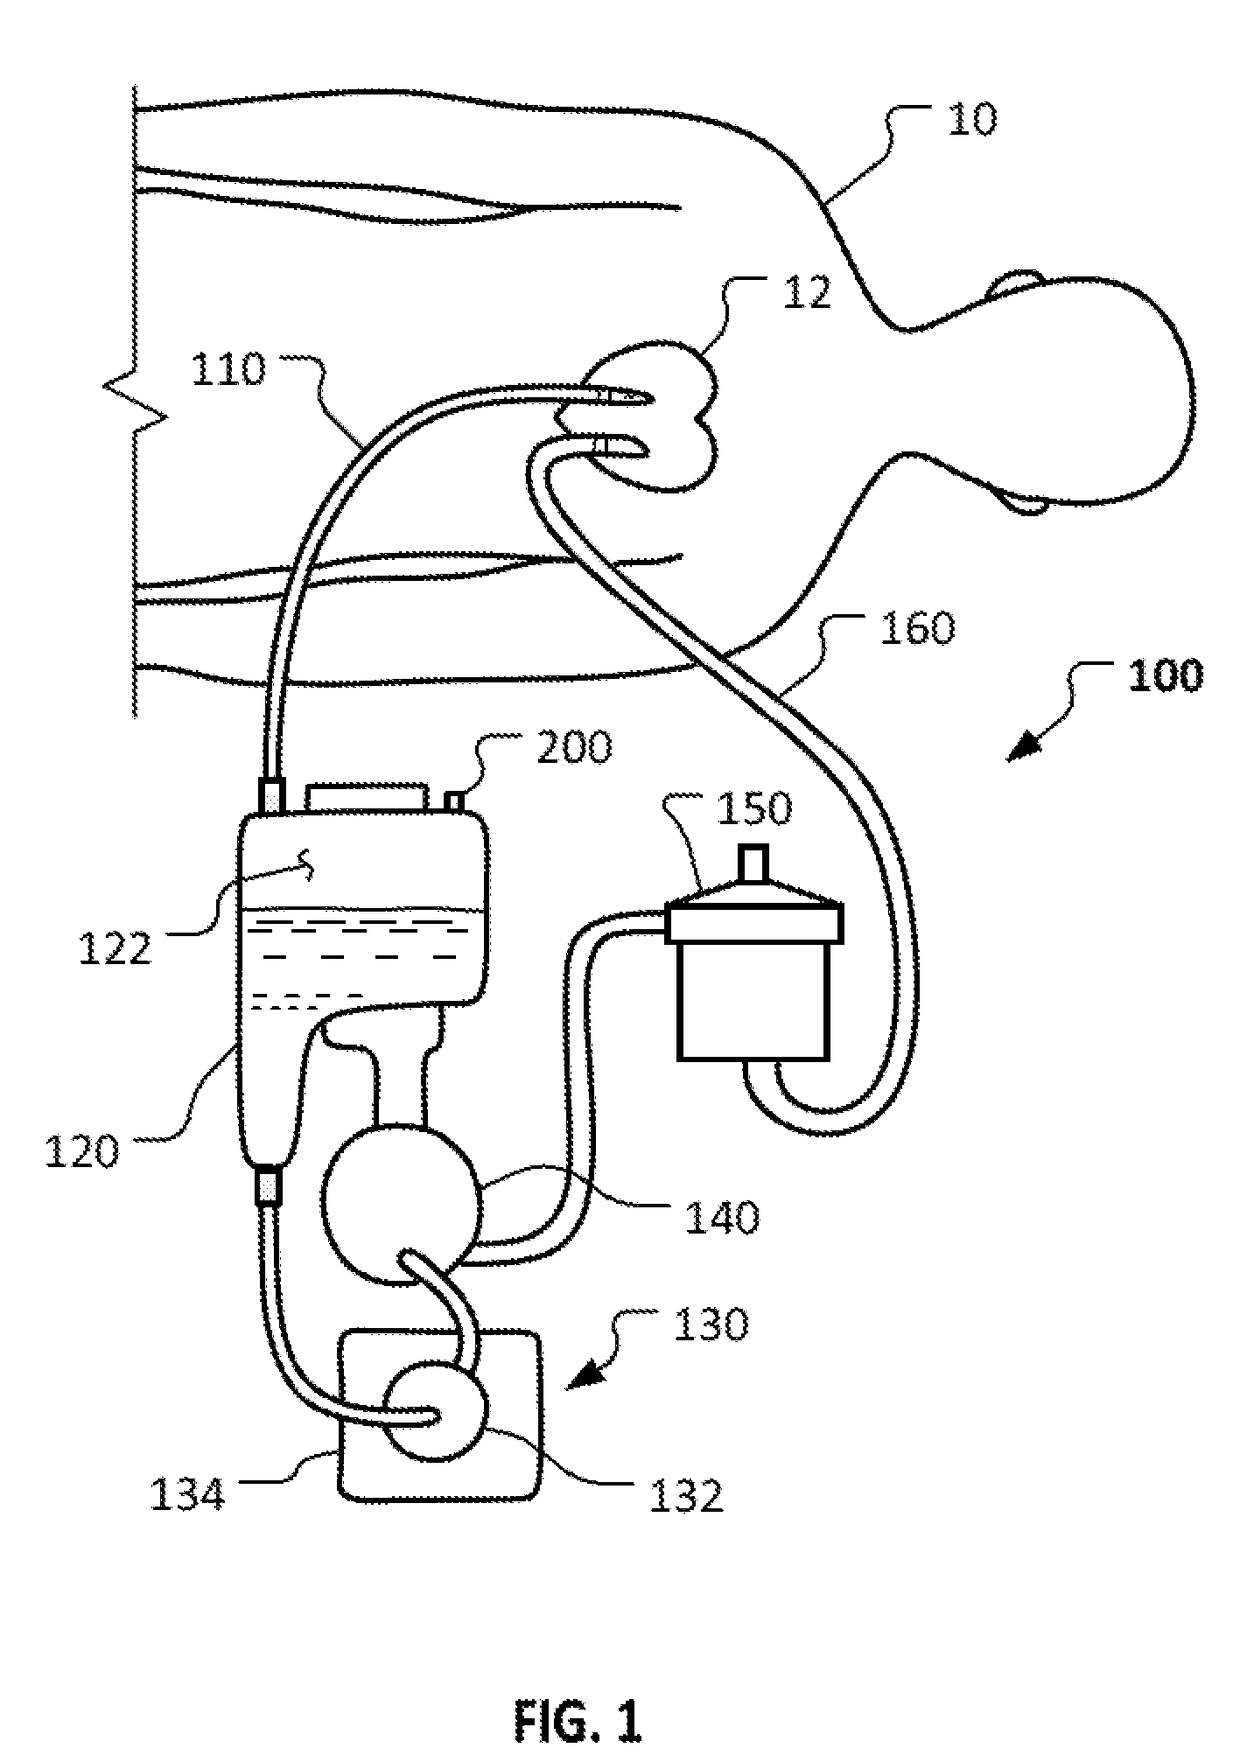 Centrifugal pumps for medical uses